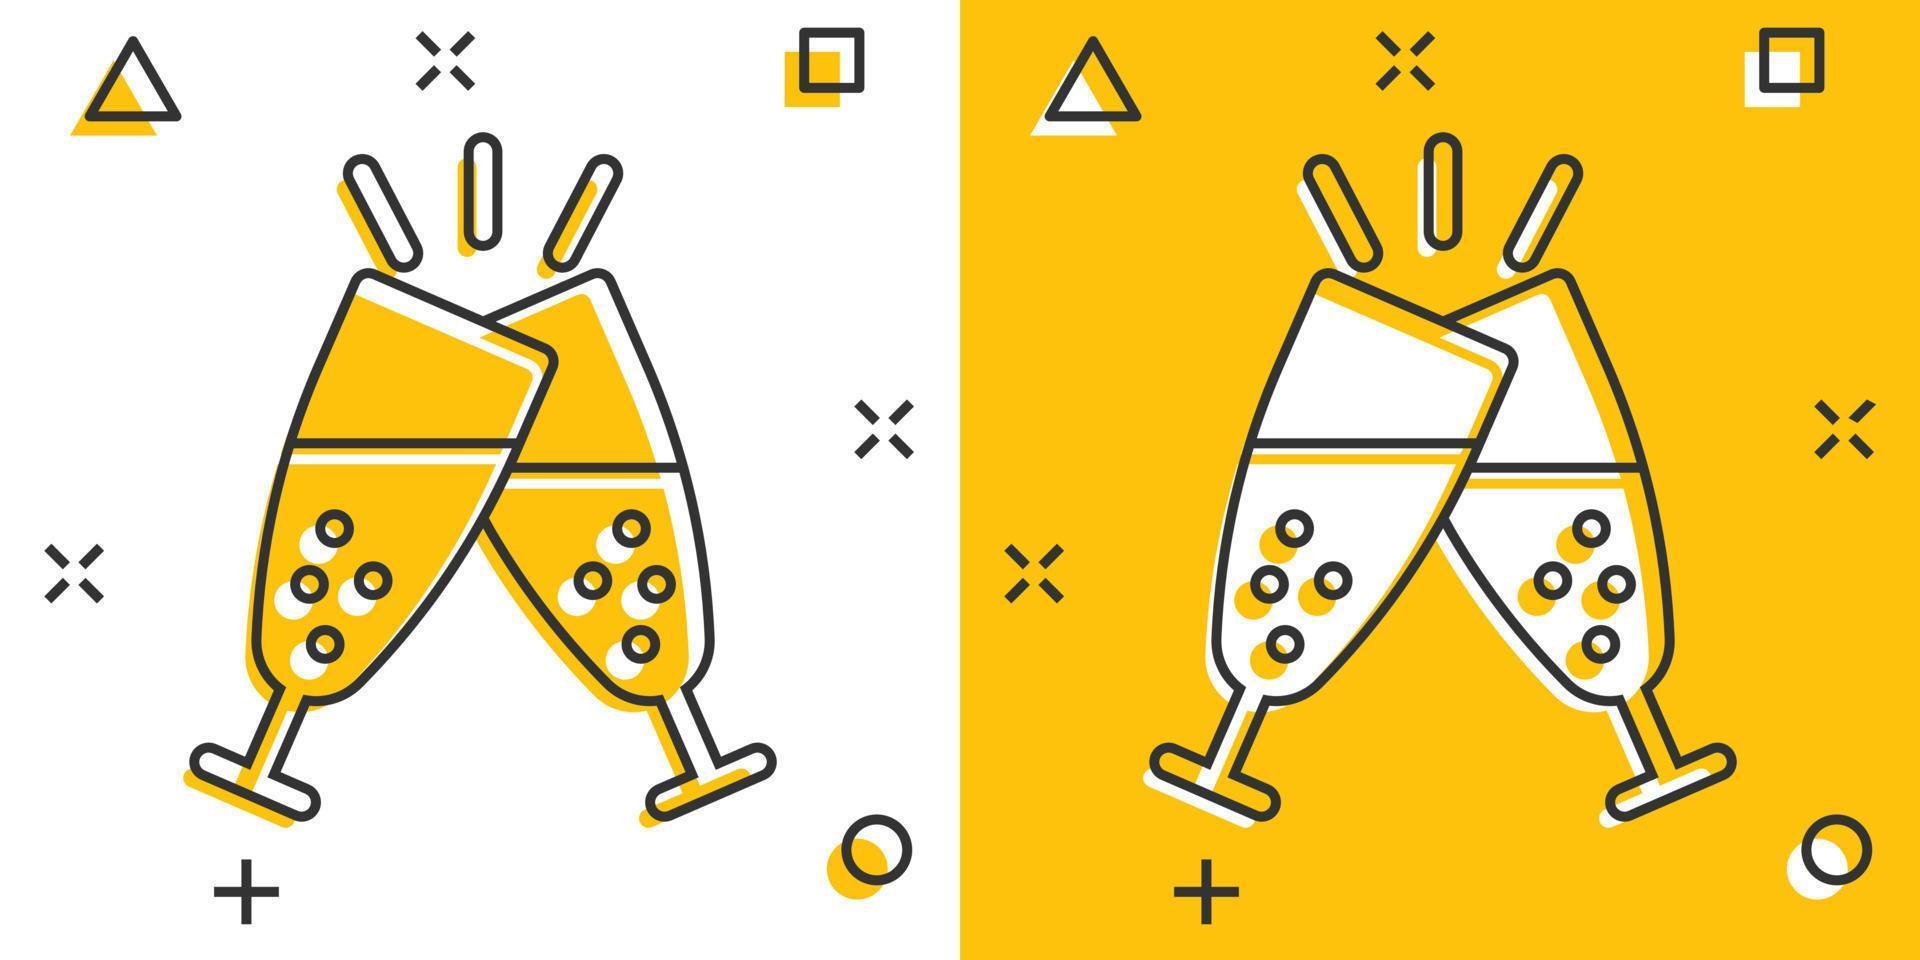 Champagne glass icon in comic style. Alcohol drink vector cartoon illustration on white isolated background. Cocktail splash effect business concept.